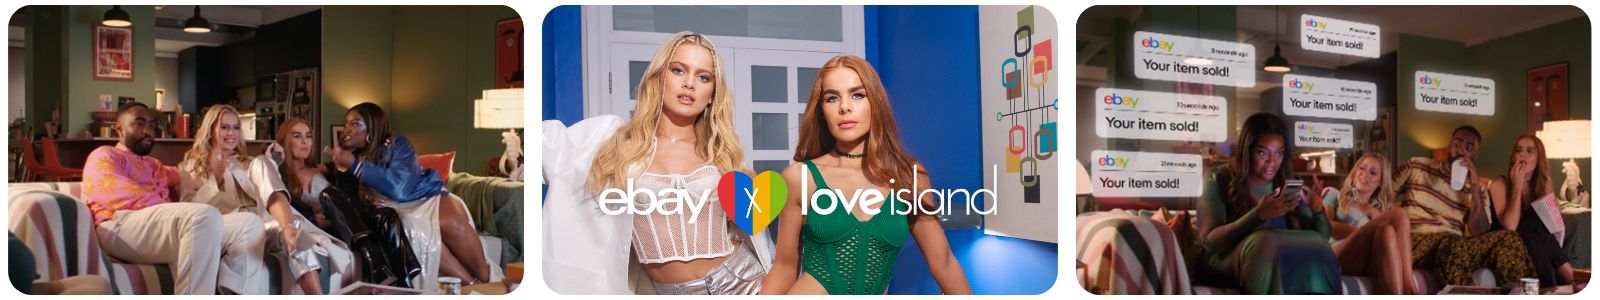 3 images representing the EssenceMediacom campaign for eBay and ITV's Love Island